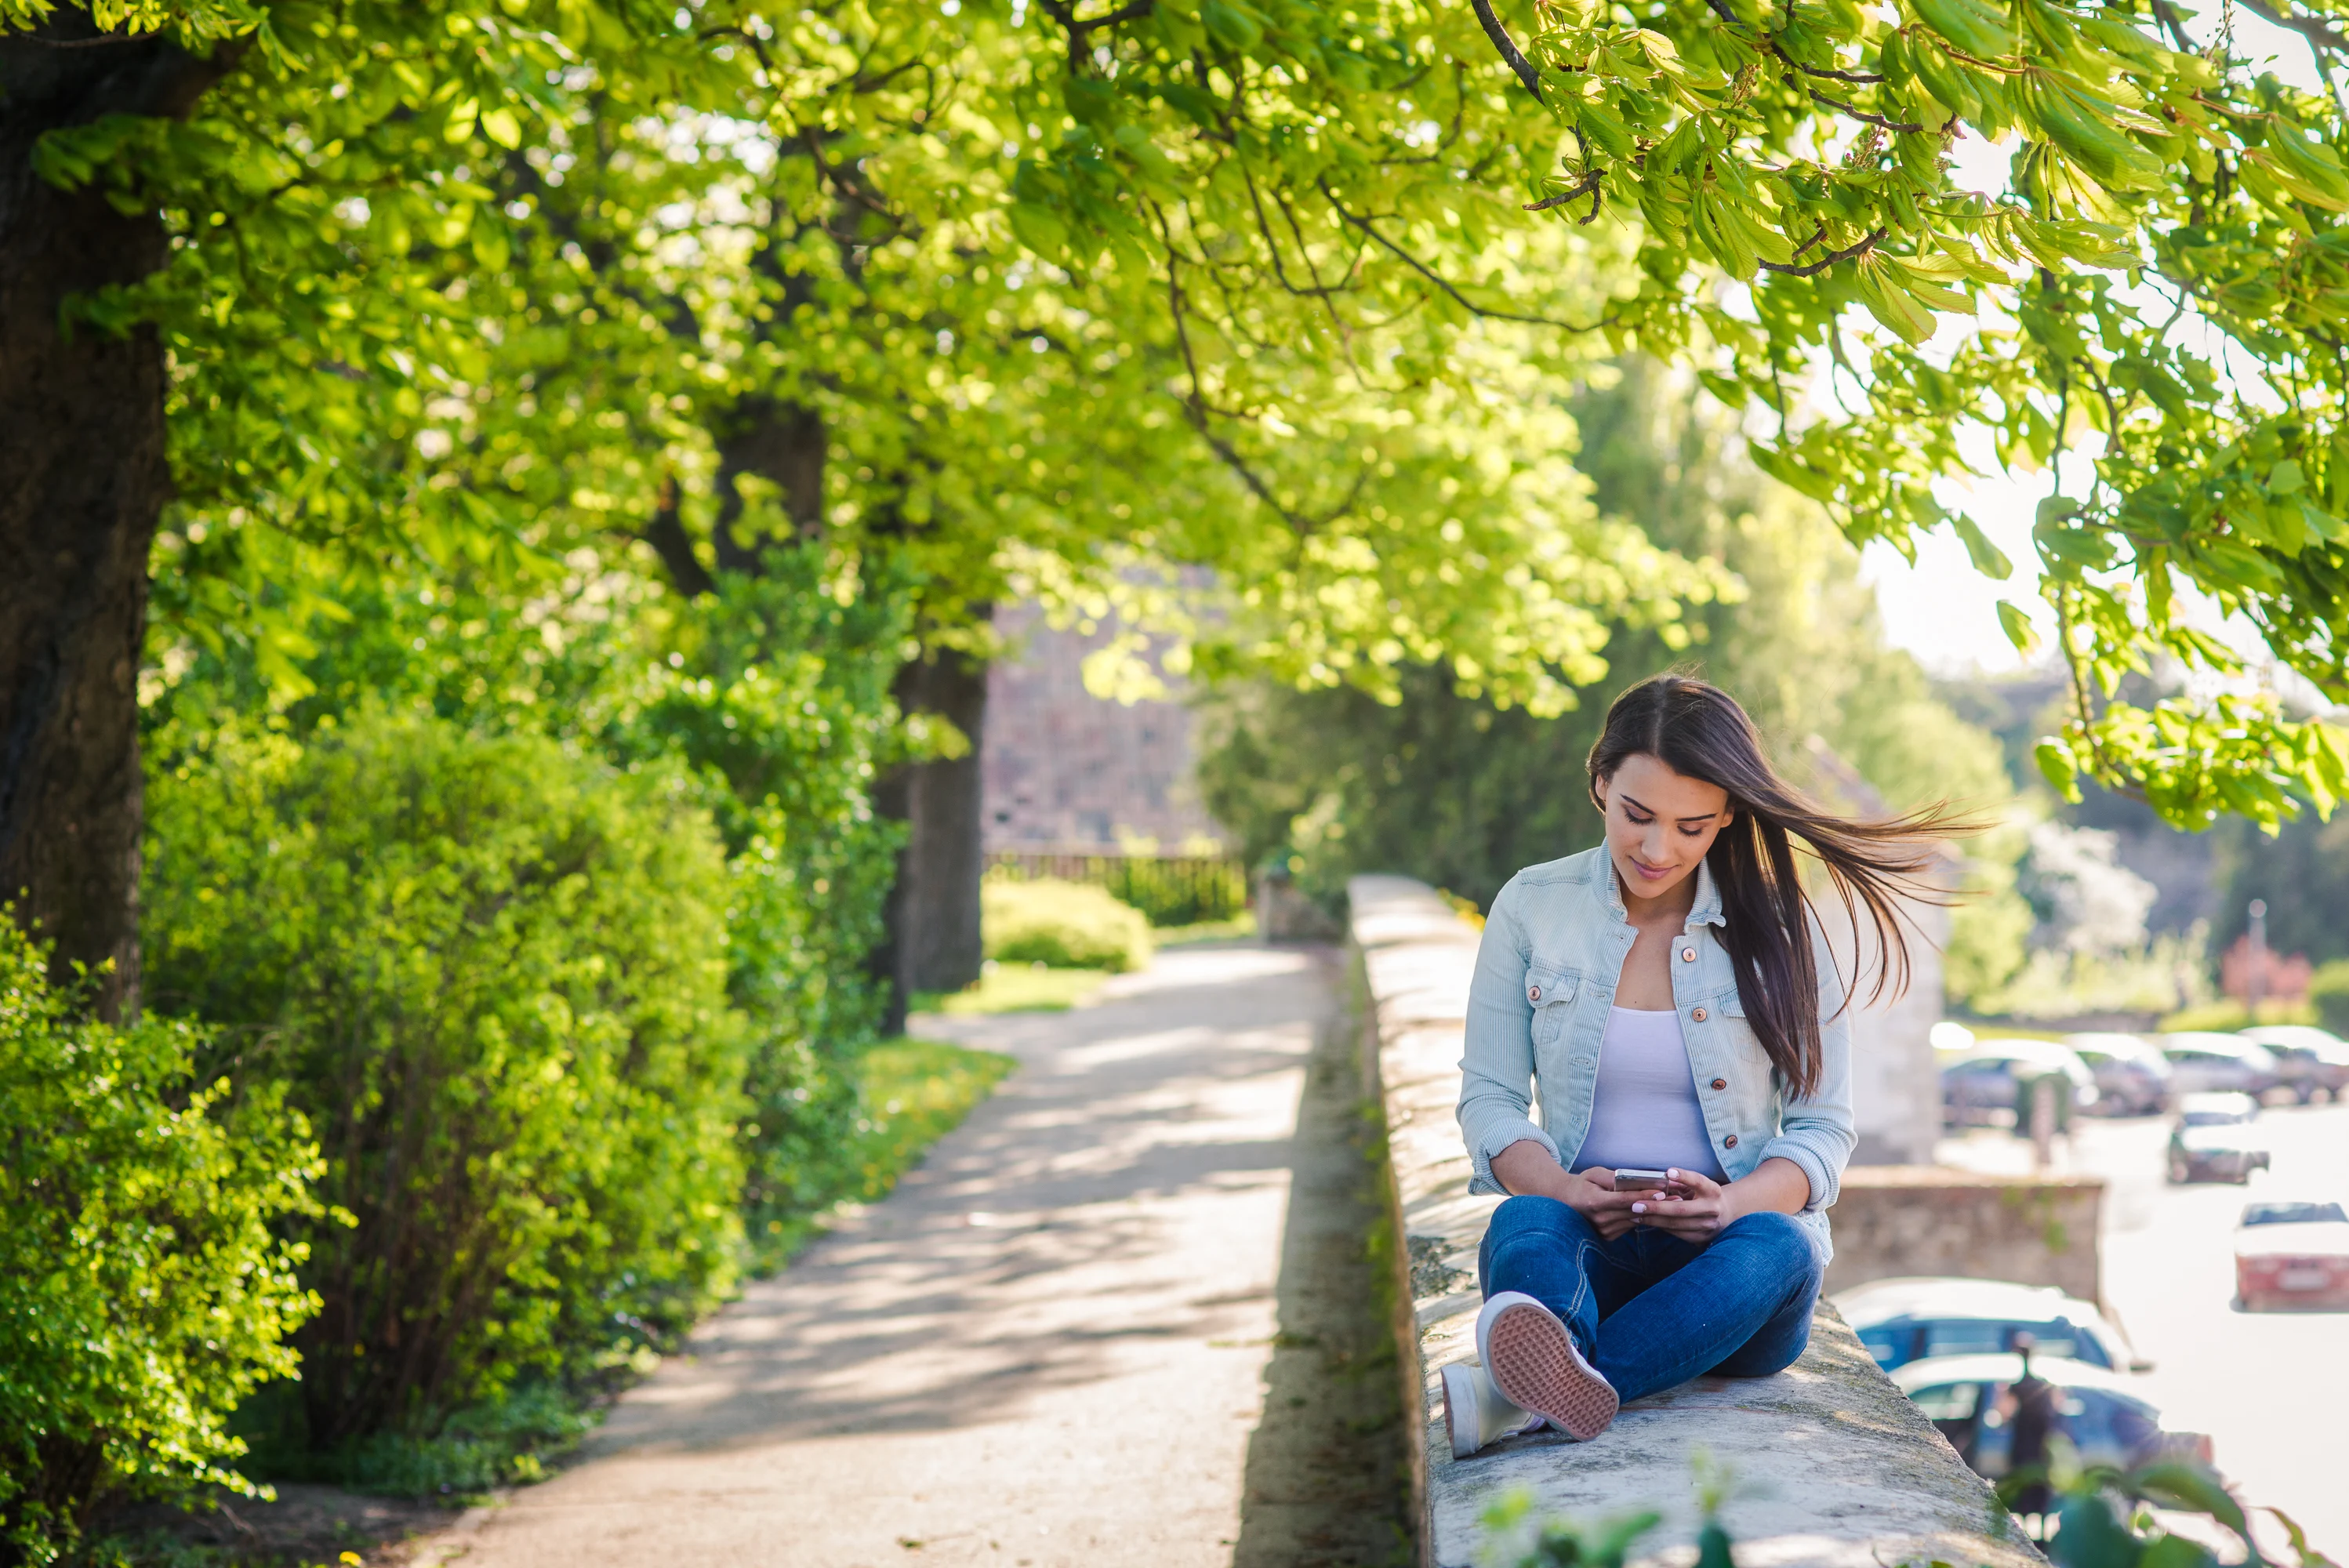 Girl sitting in nature pathway